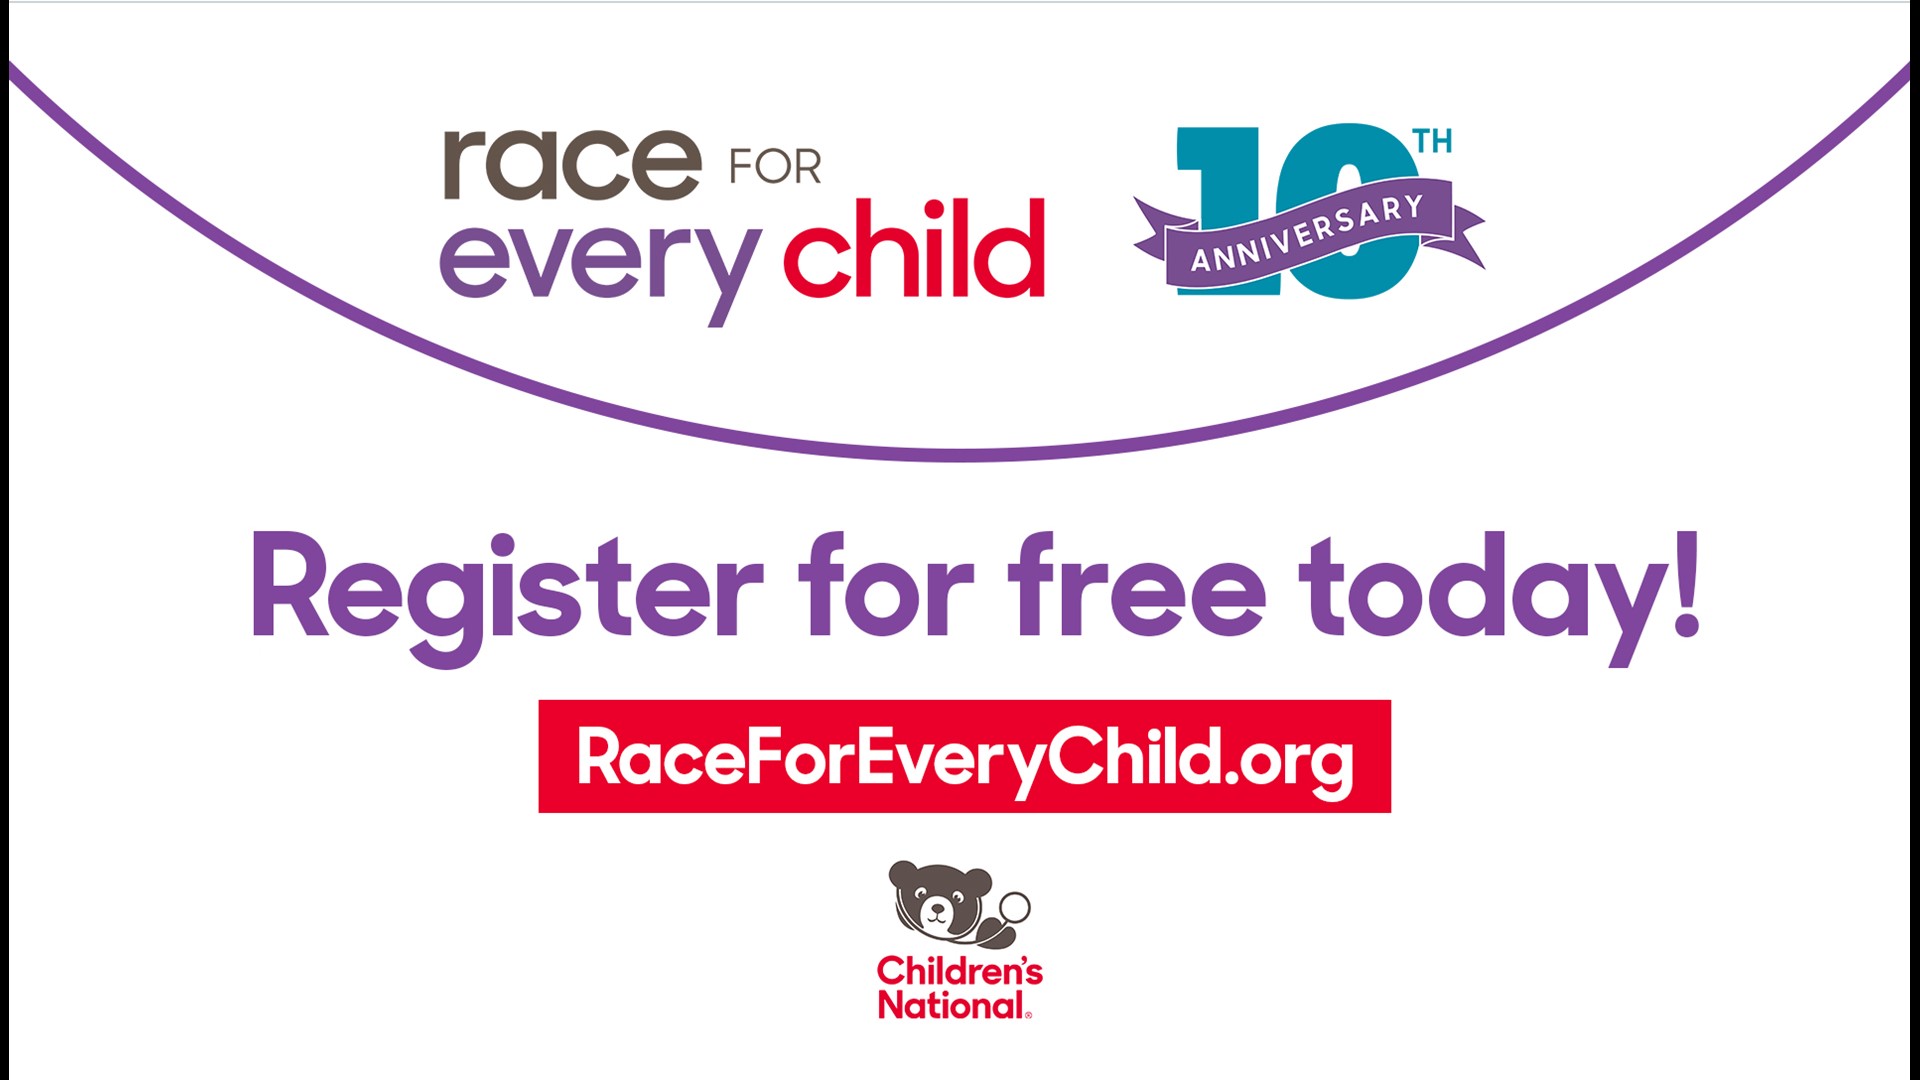 Sponsored by: Children's National. Support Children's National at their 10th annual 'Race for Every Child' on Oct. 15, 2022. Register at RaceForEveryChild.org.